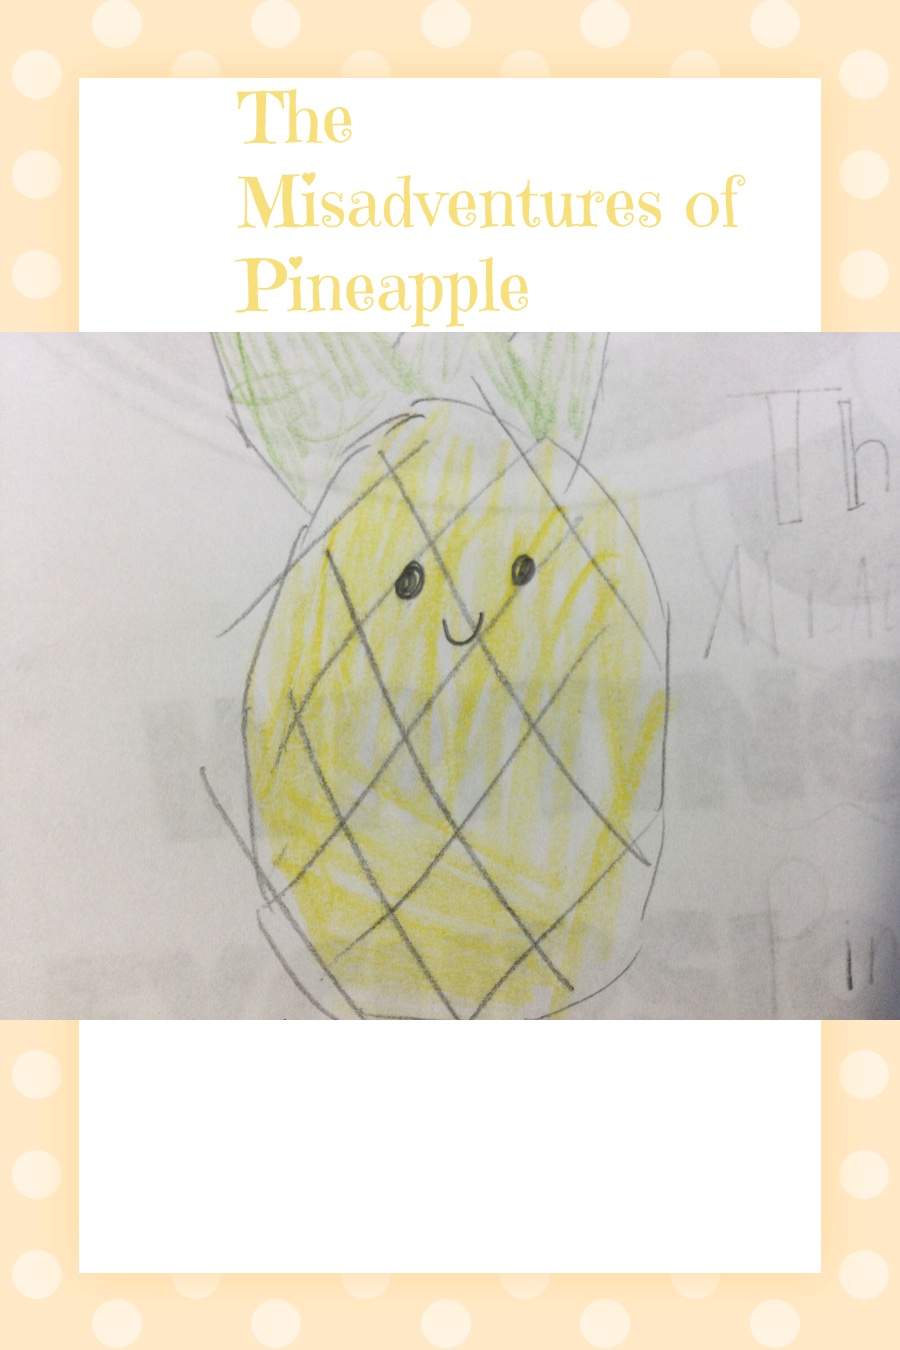 The Misadventures of Pineapple by Natalia M